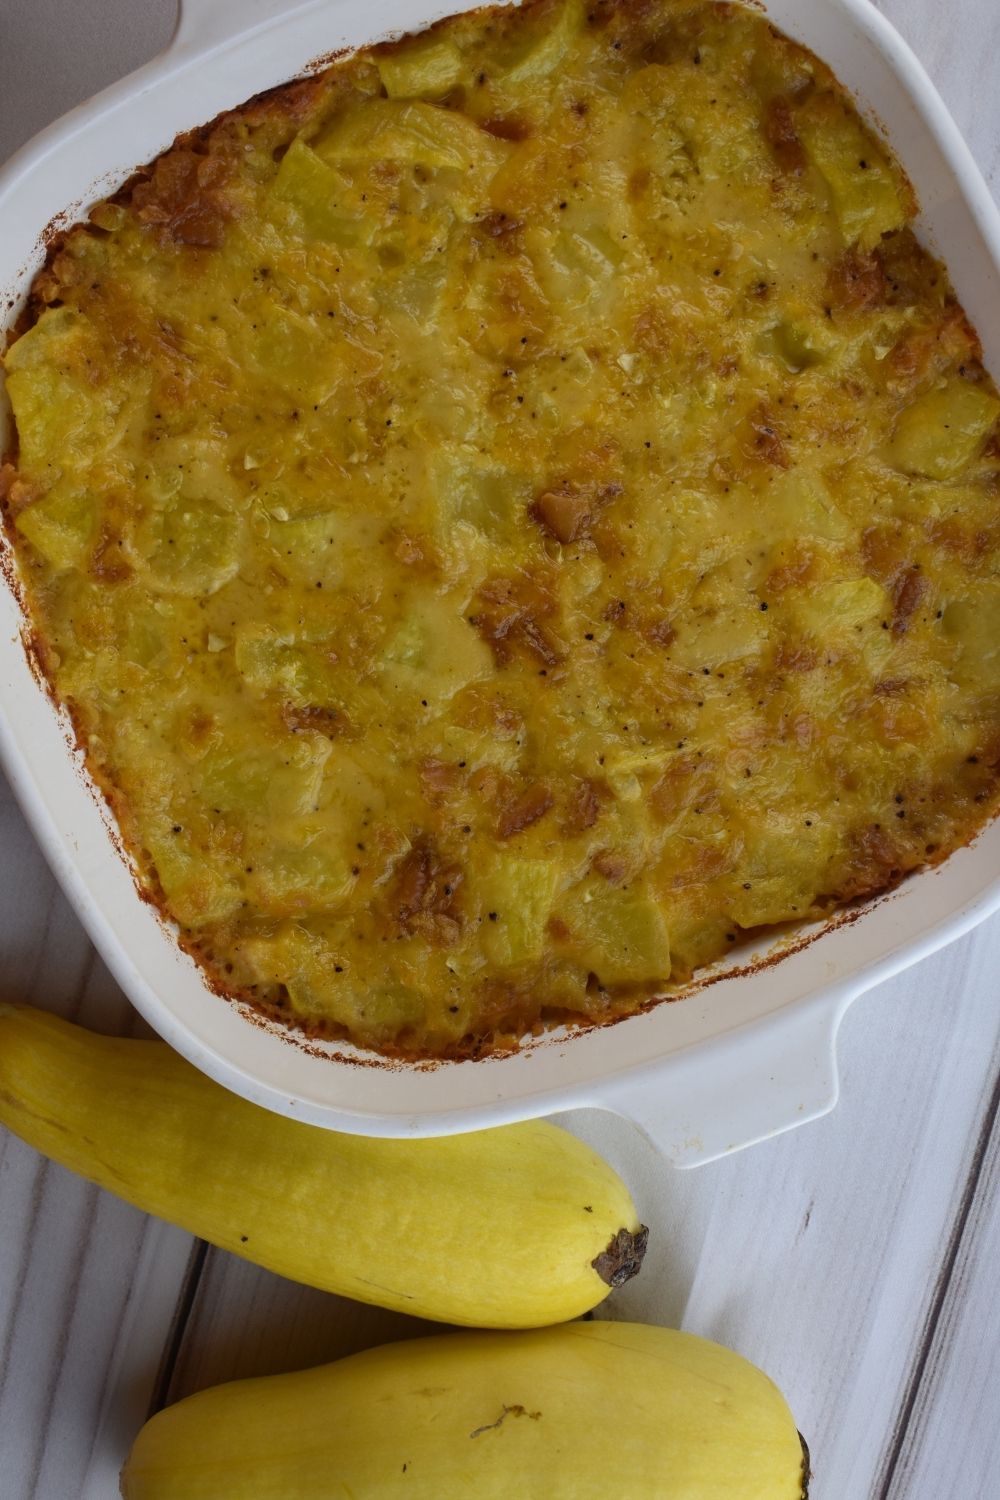 Kentucky Southern Squash Casserole is the perfect way to turn those yellow squash into a family friendly side dish. Starring butter crackers, cream of chicken soup, and cheese, this recipe perfectly combines flavor and texture, and this dish will soon become a summer staple.